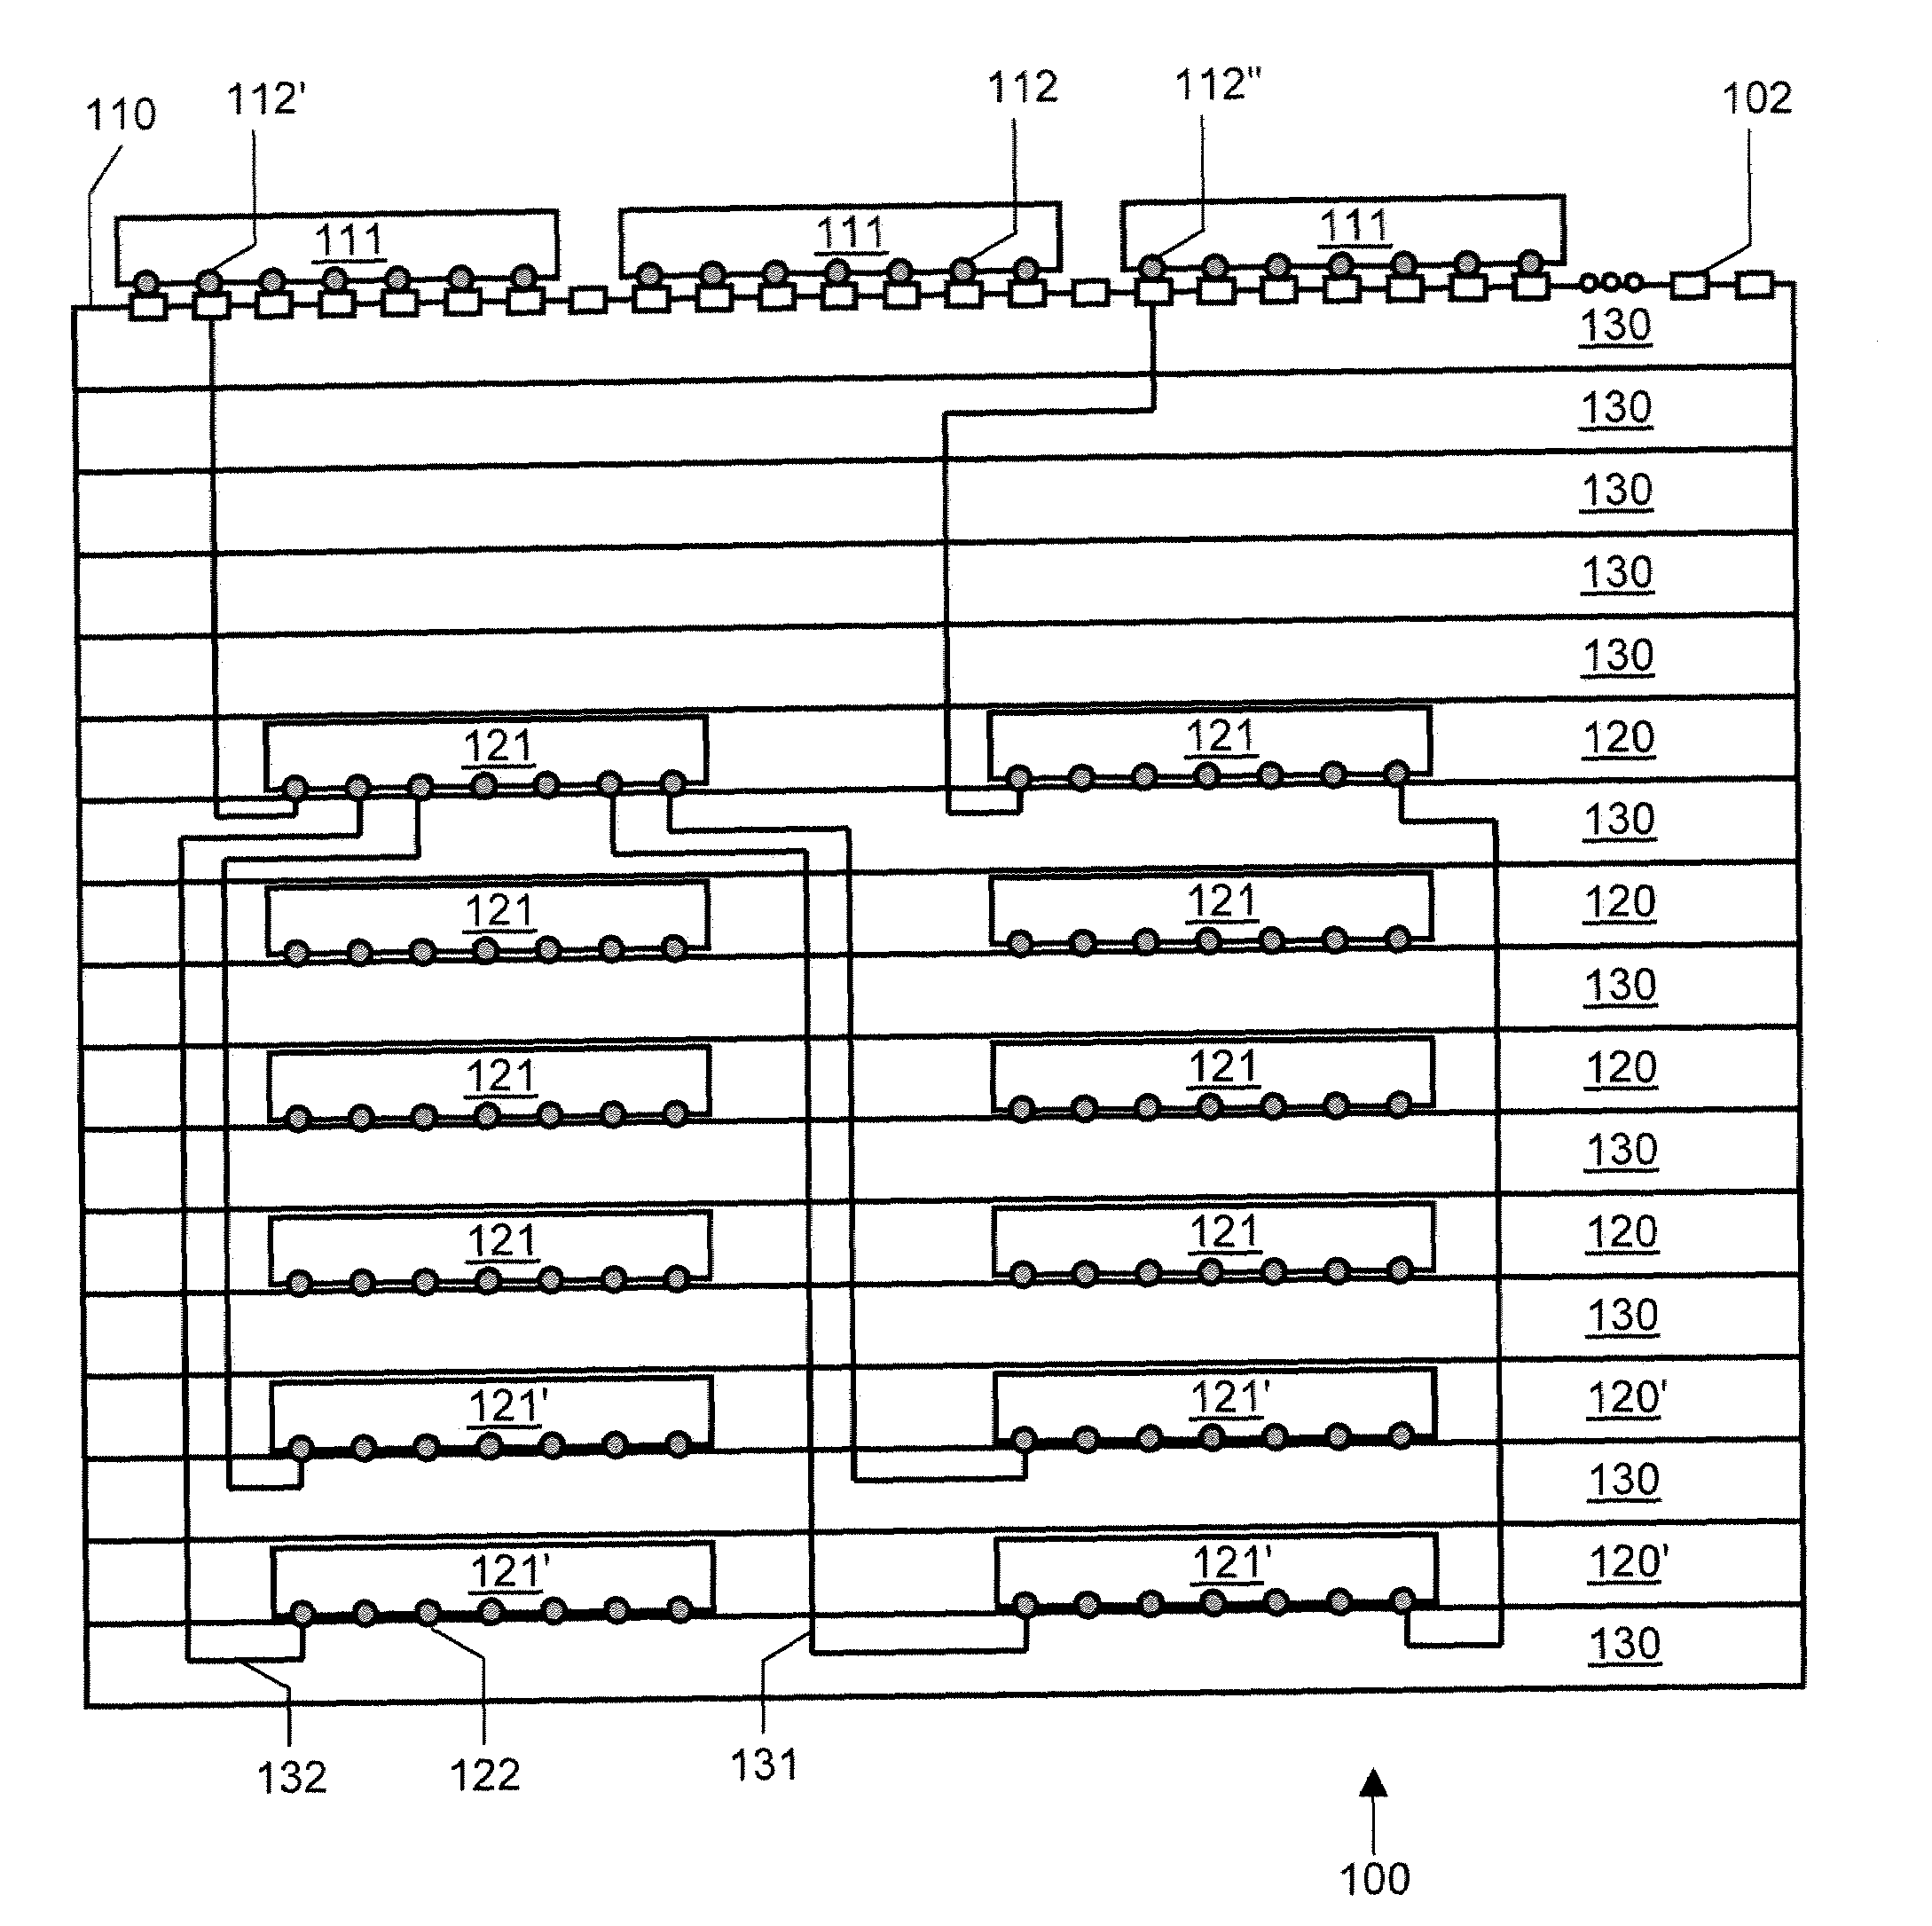 Reprogrammable circuit board with alignment-insensitive support for multiple component contact types